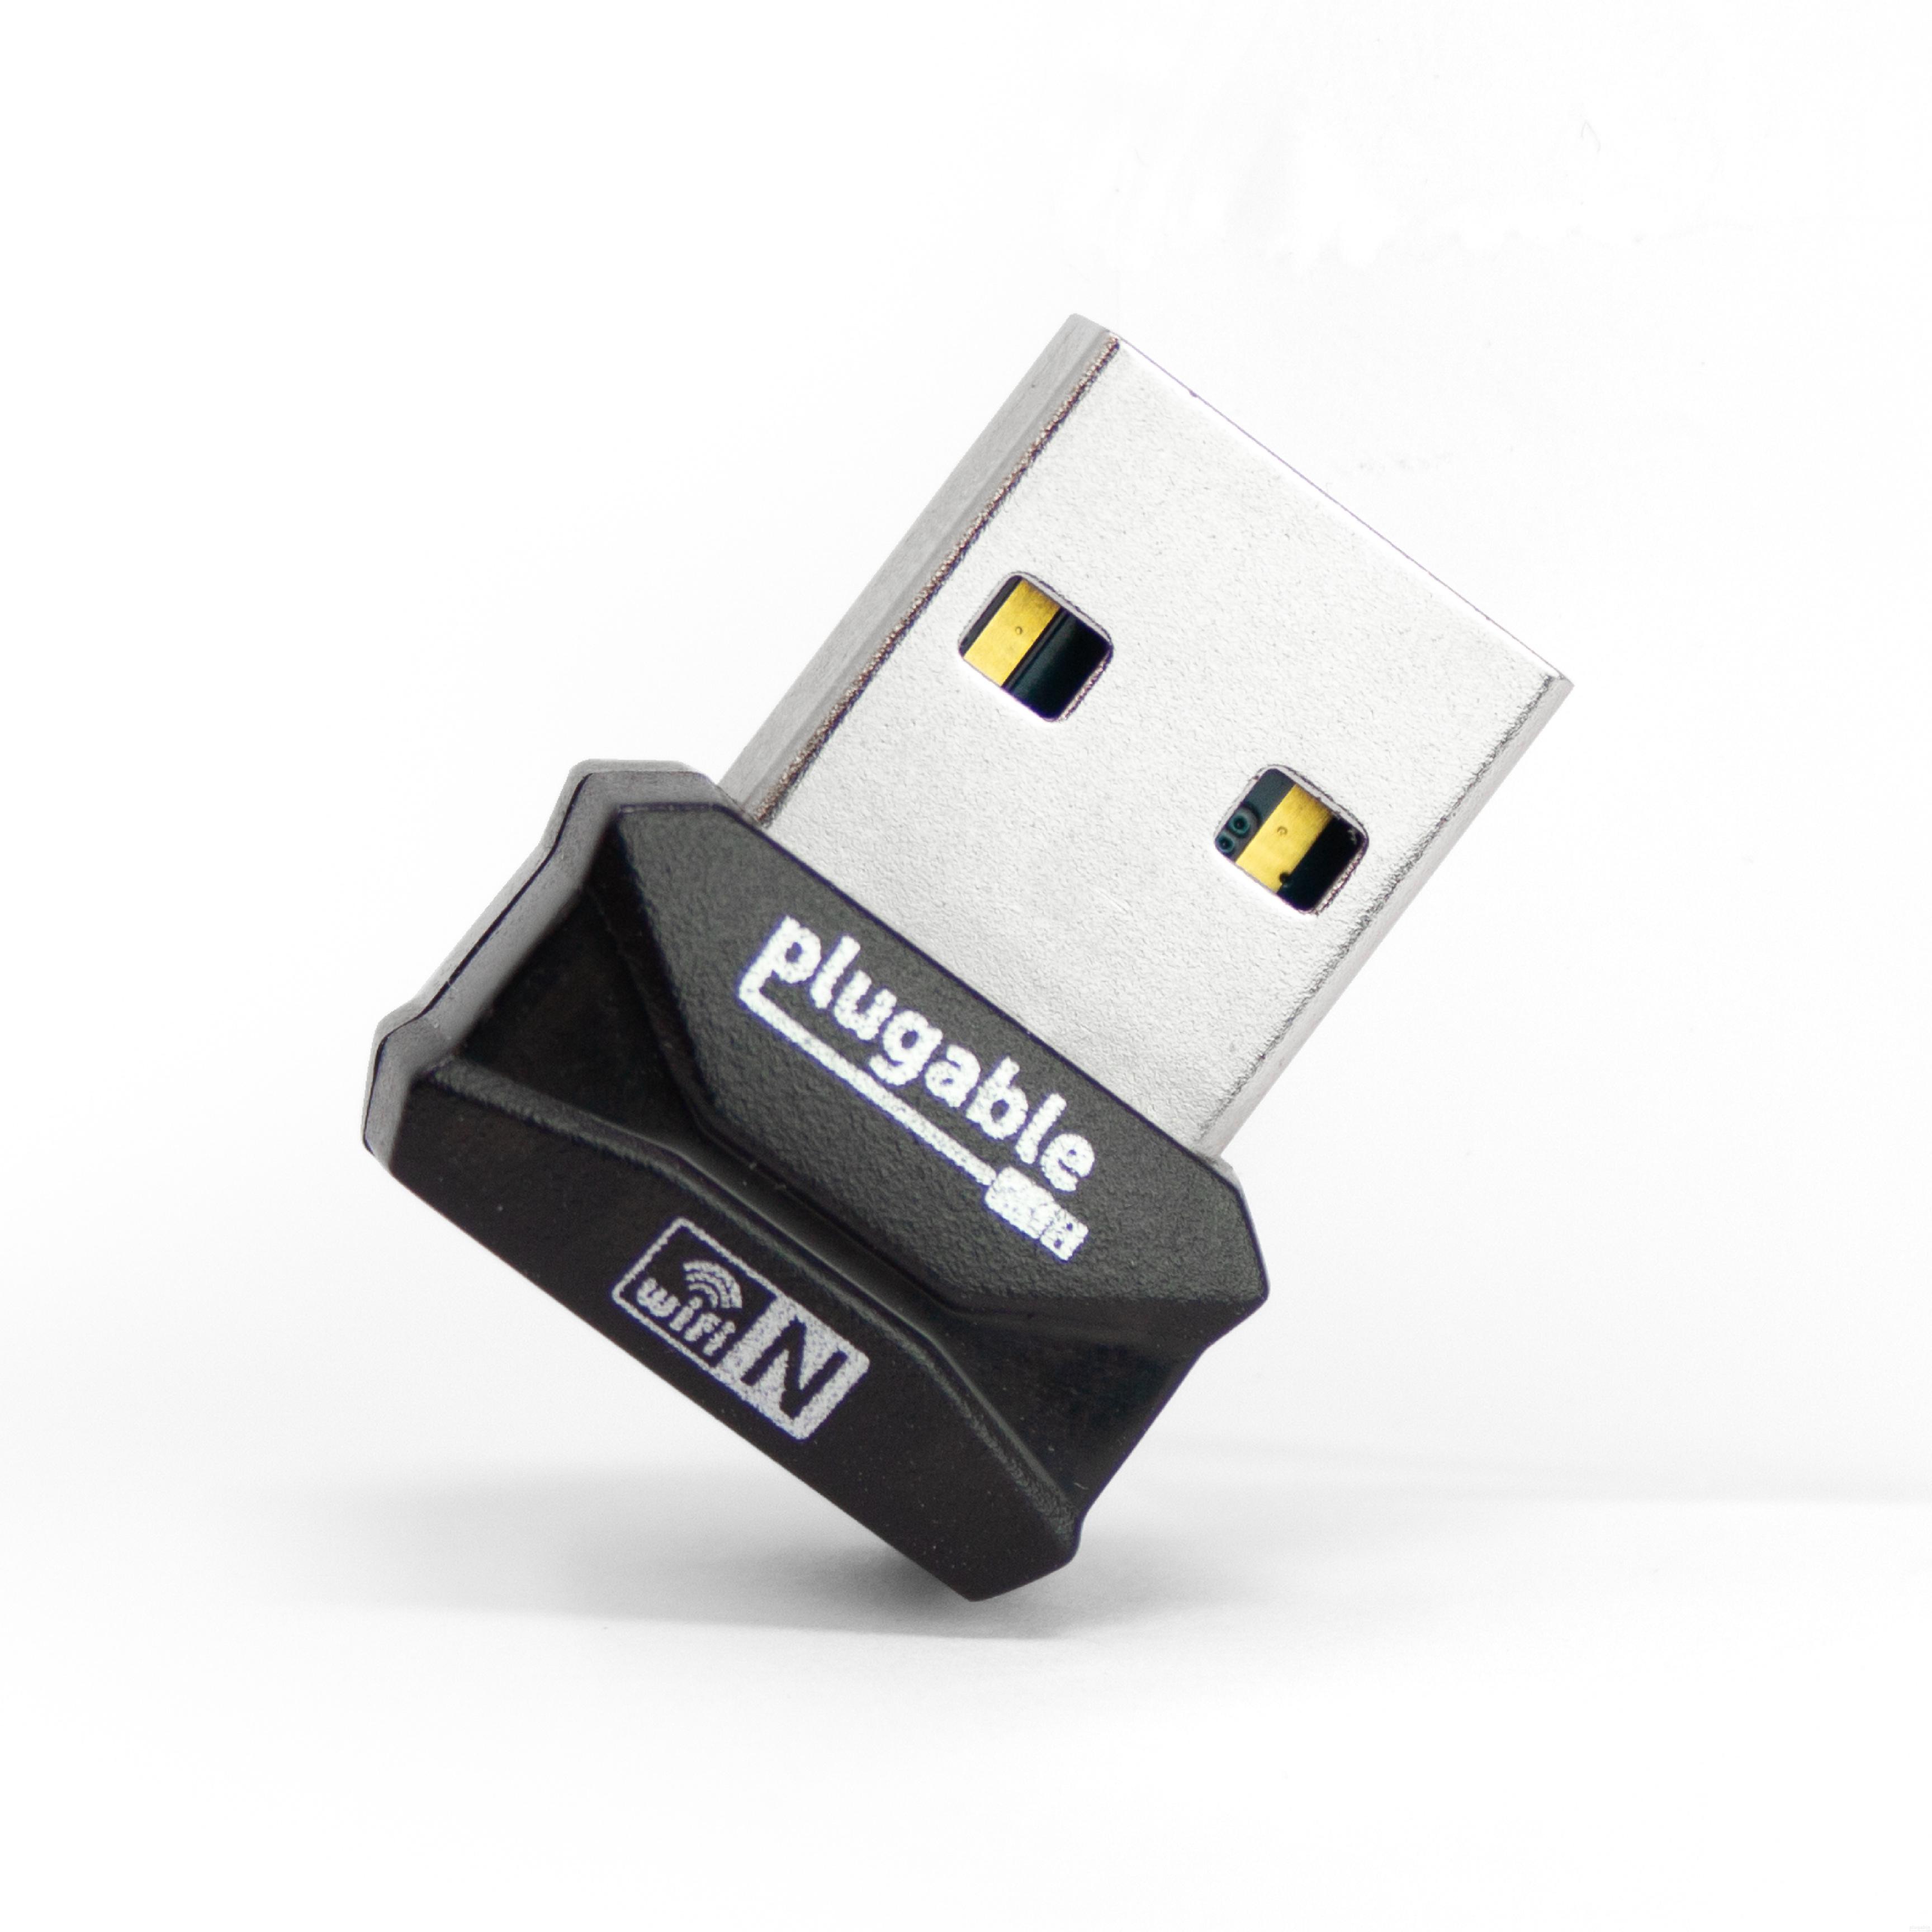 Plugable USB 2.0 Wireless N 802.11n 150 Mbps Nano WiFi Network Adapter (Realtek RTL8188EUS Chipset) Driverless Plug and Play for Windows - image 1 of 6